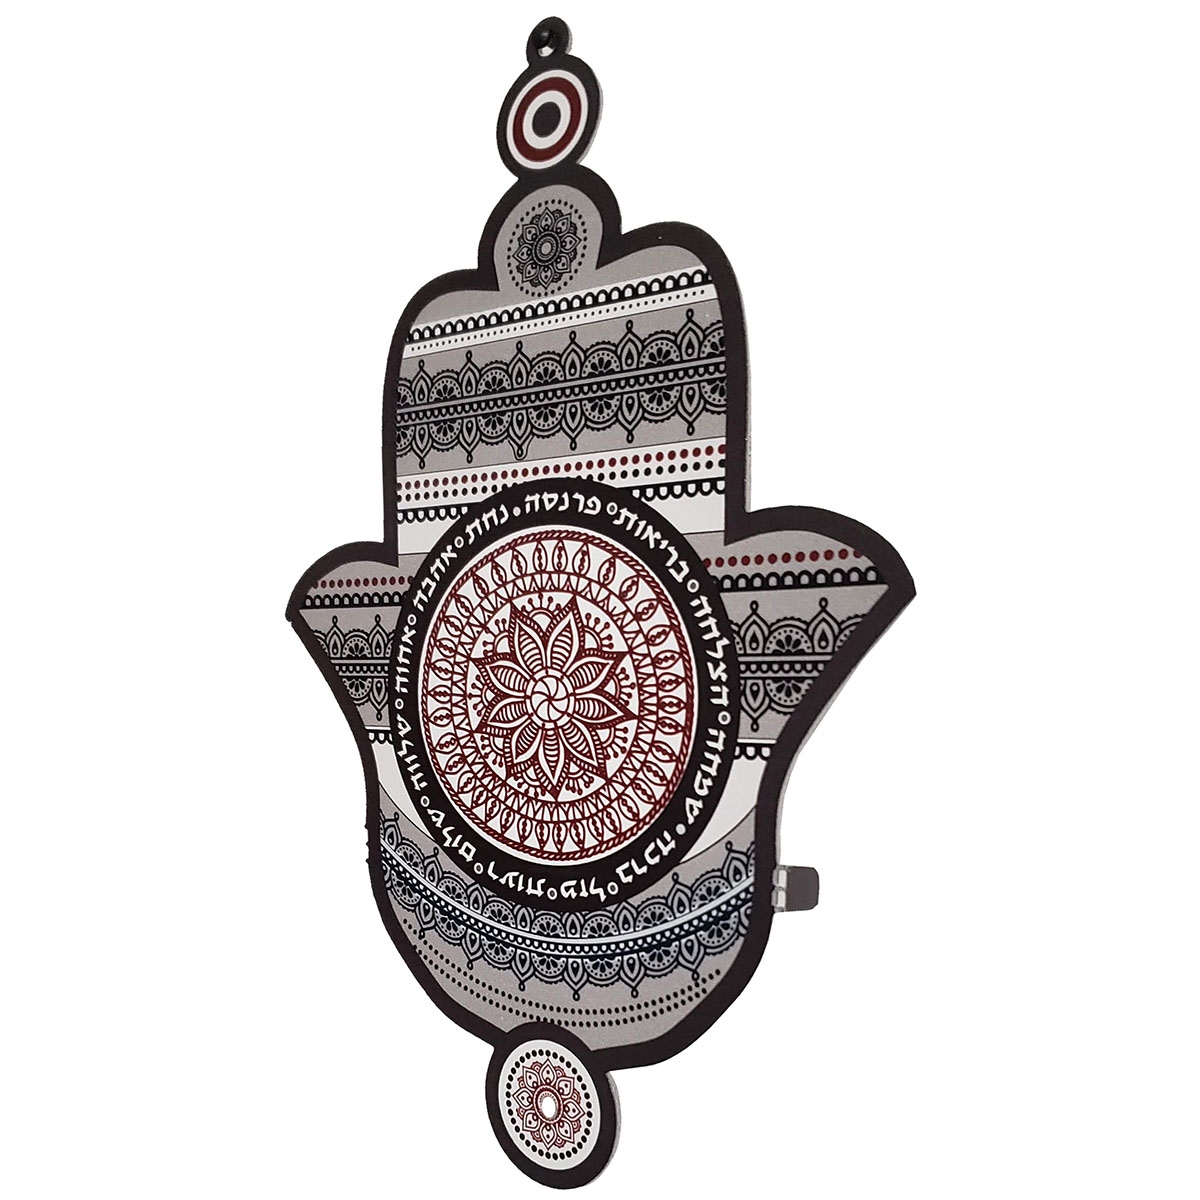 Dorit Judaica Hamsa Wall Hanging With Home Blessings and Mandala Patterns (Red, White, Black and Grey) - 1